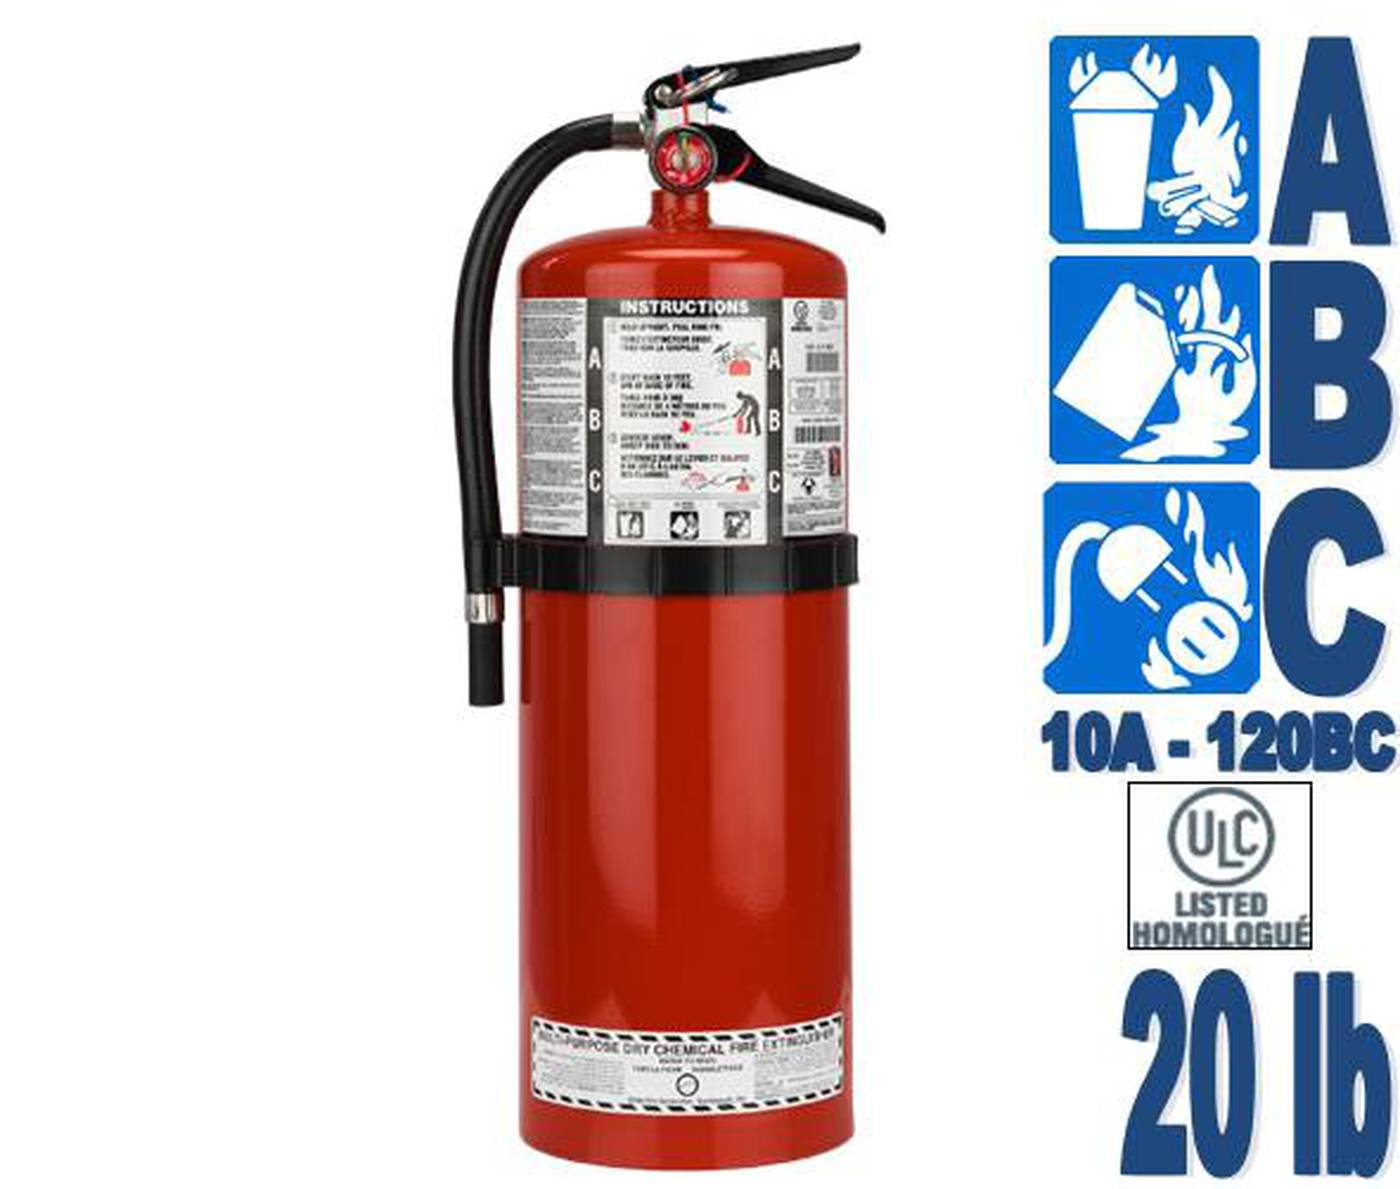 Fire extinguisher 20 lbs type ABC, ULC 10A-120BC, with wall hook.